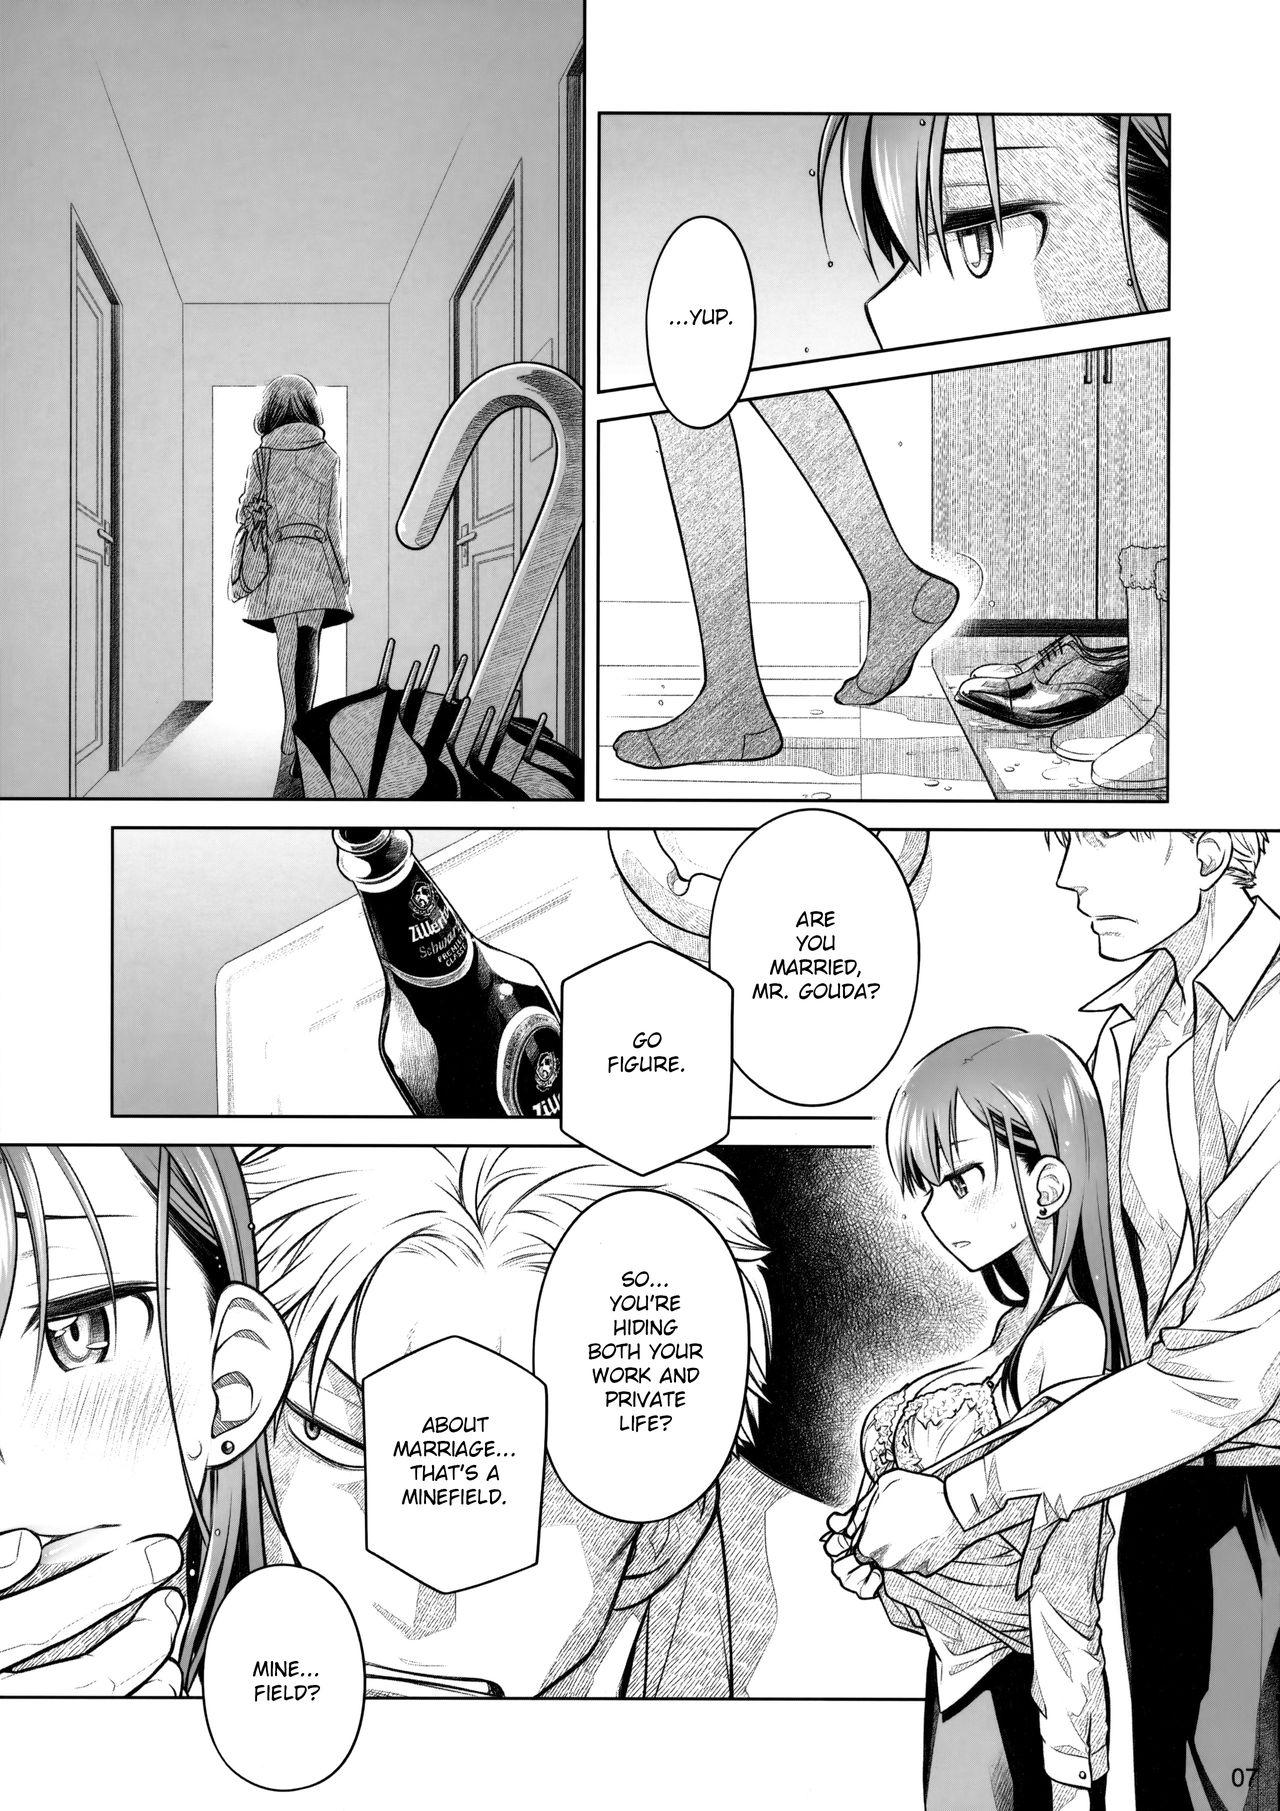 Student Stay by Me Zenjitsutan Fragile S - Stay by me "Prequel" Goth - Page 6